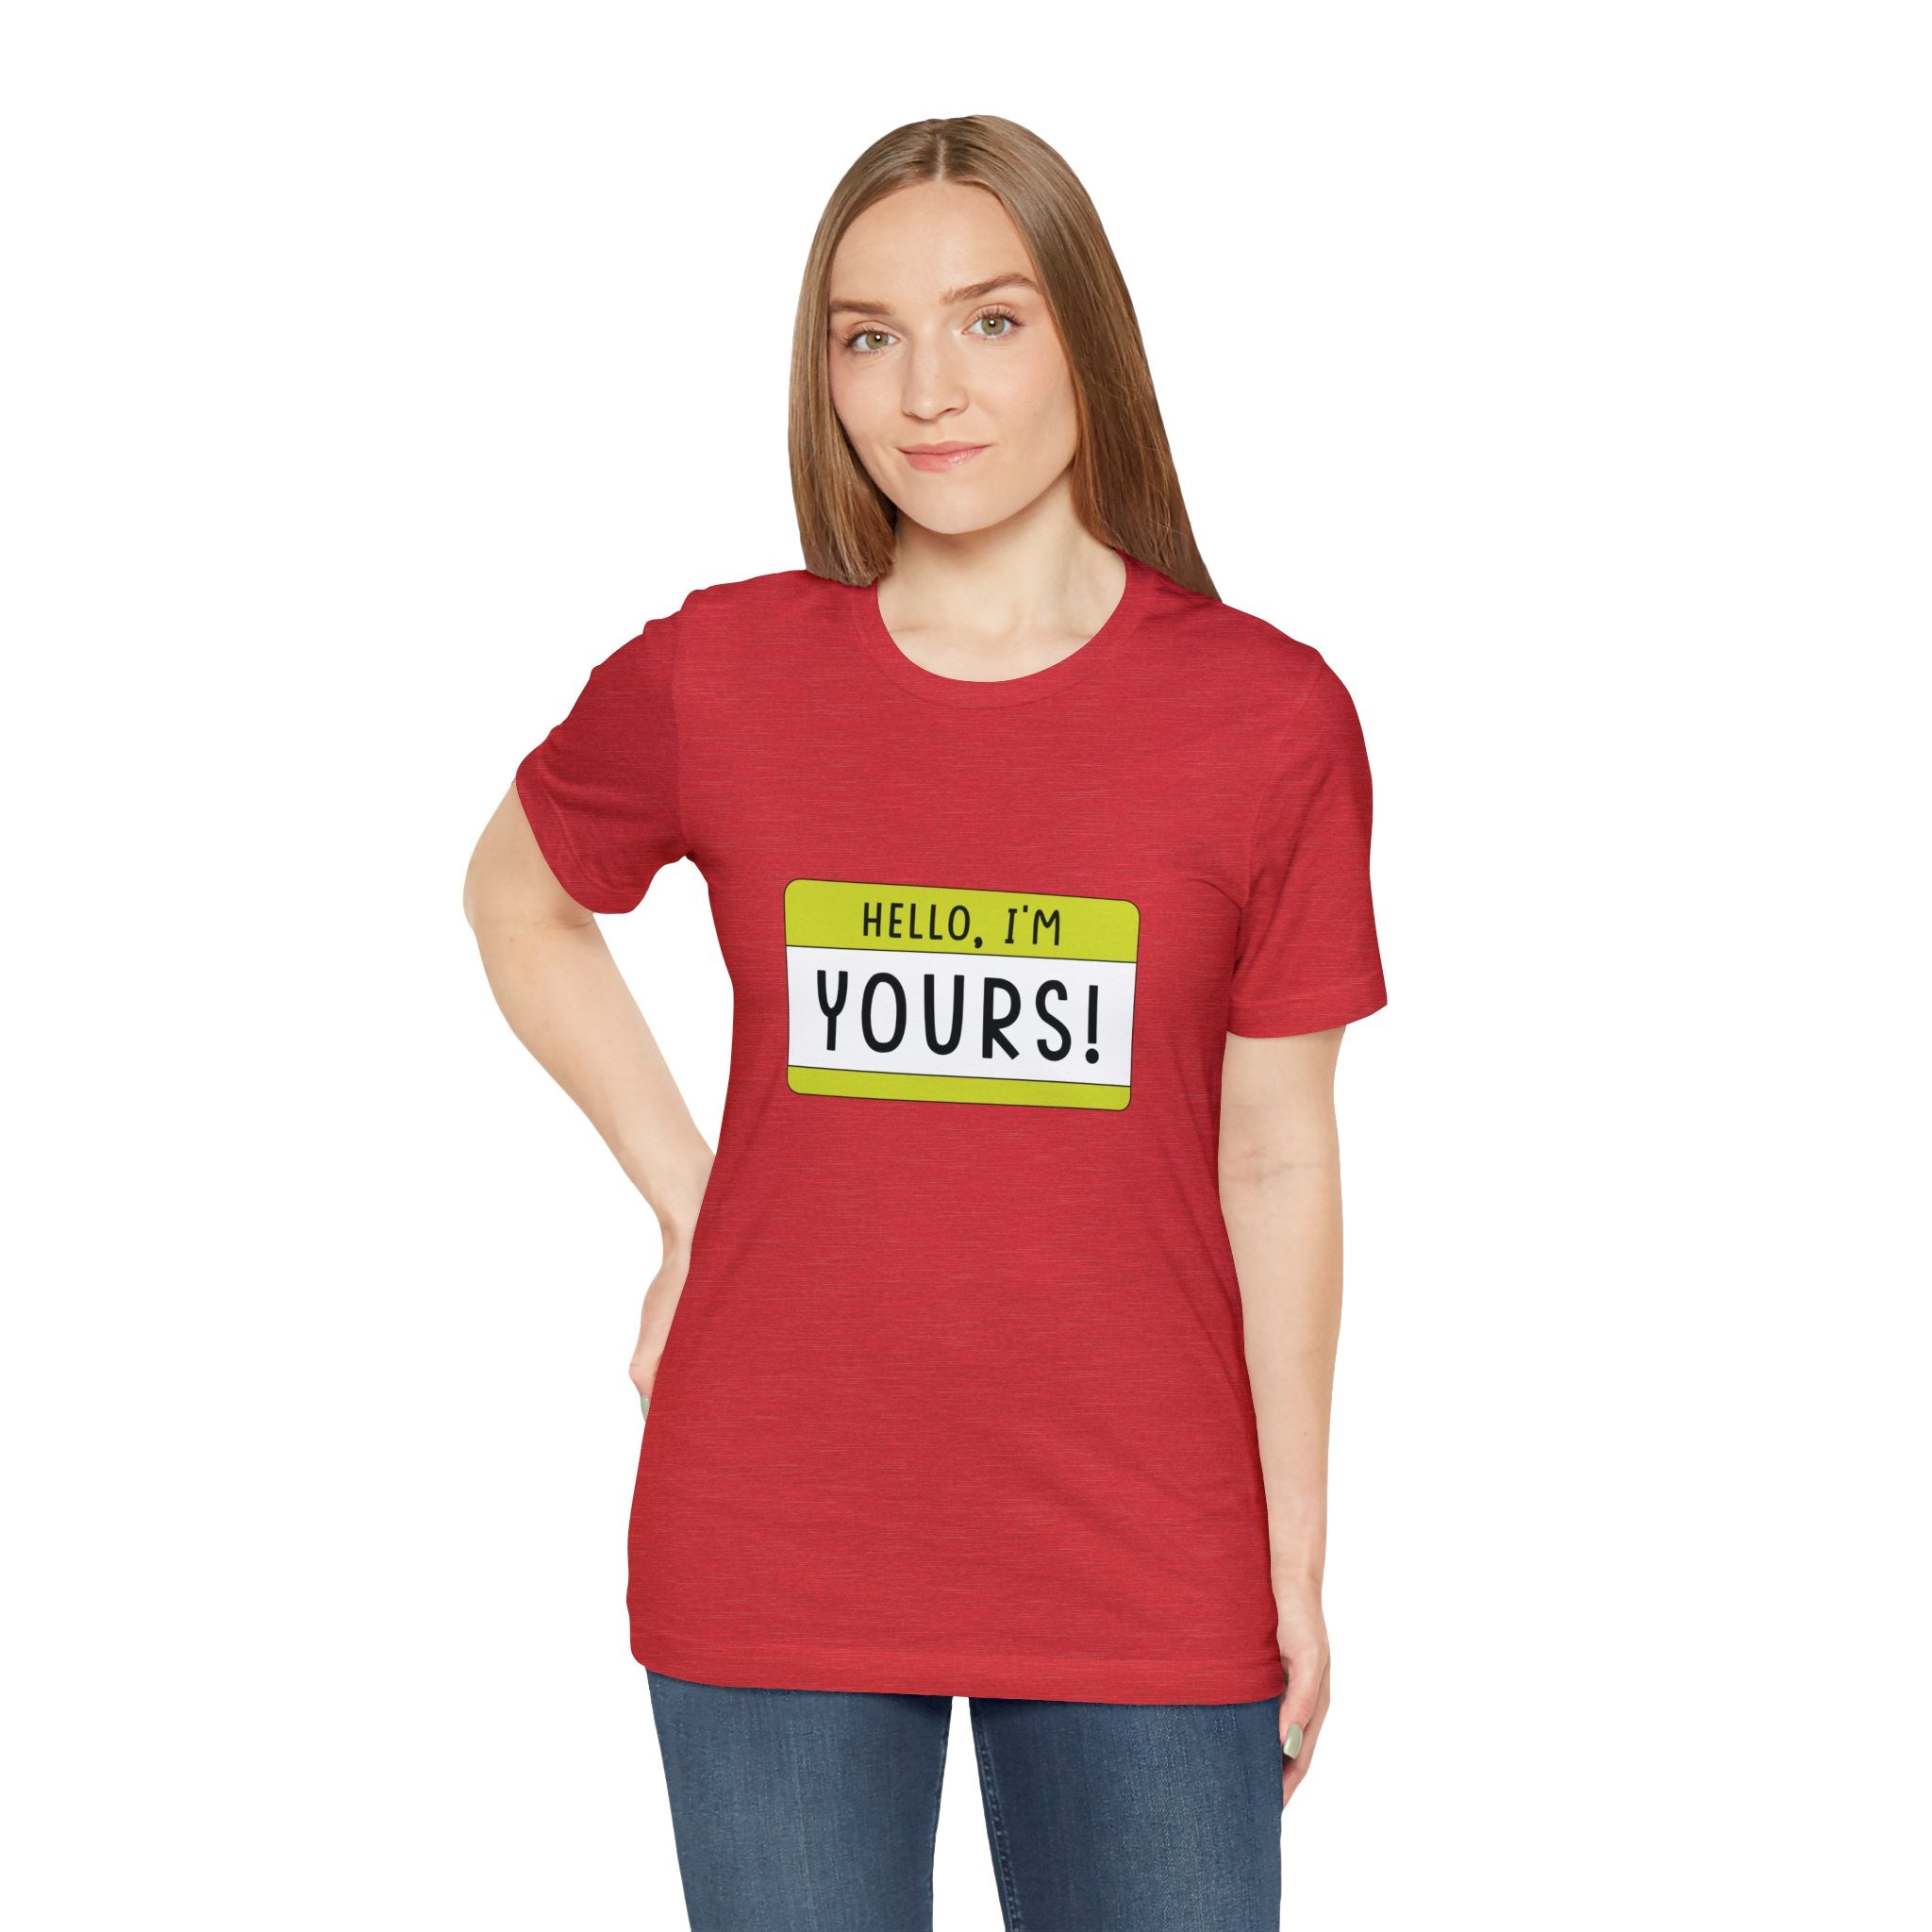 A woman in a red "Hello, I'm YOURS" t-shirt with a geeky demeanor stands facing the camera.